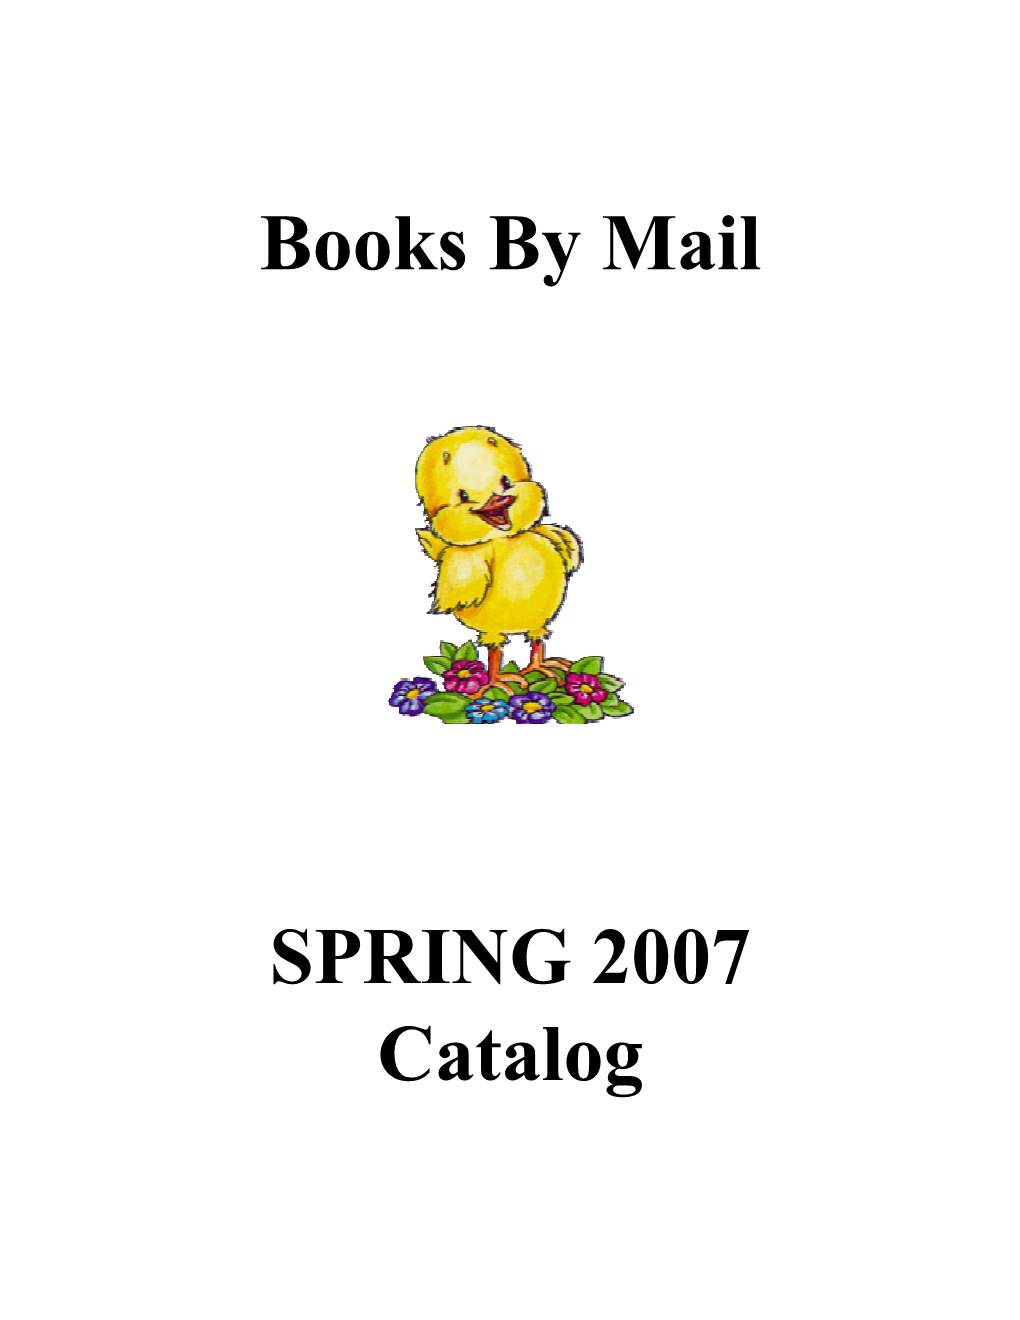 Books by Mail SPRING 2007 Catalog